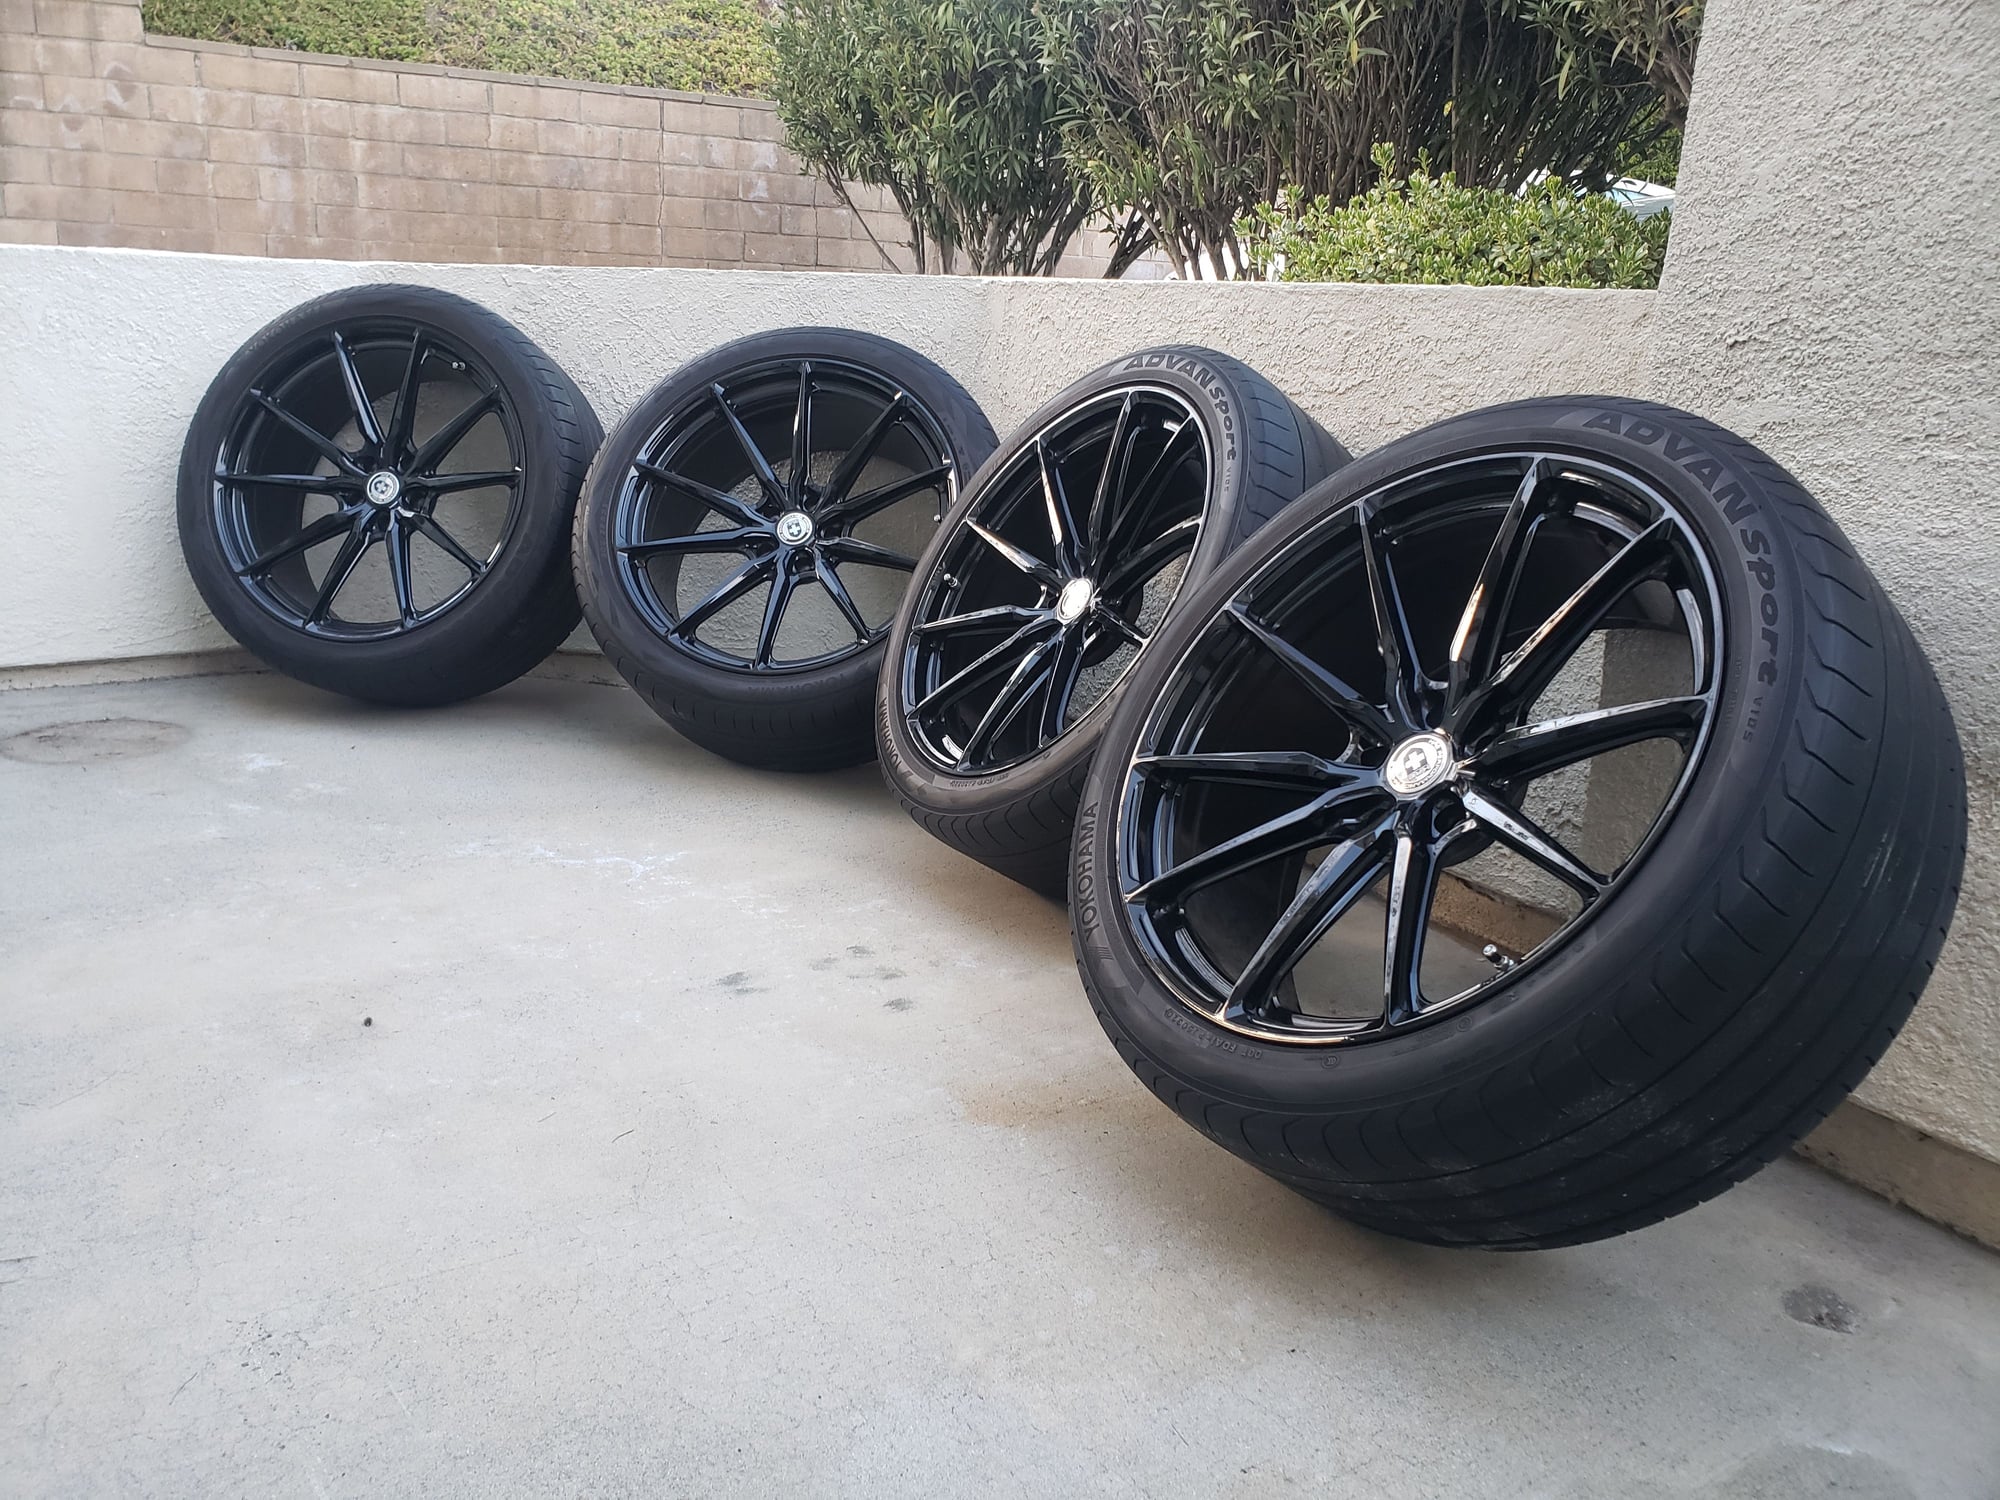 Wheels and Tires/Axles - HRE WHEELS 23" YOKOHAMA TIRES 5X130 CLEAN CONDITION - Used - 2021 to 2023 Mercedes-Benz G-Class - Calabasas, CA 91302, United States